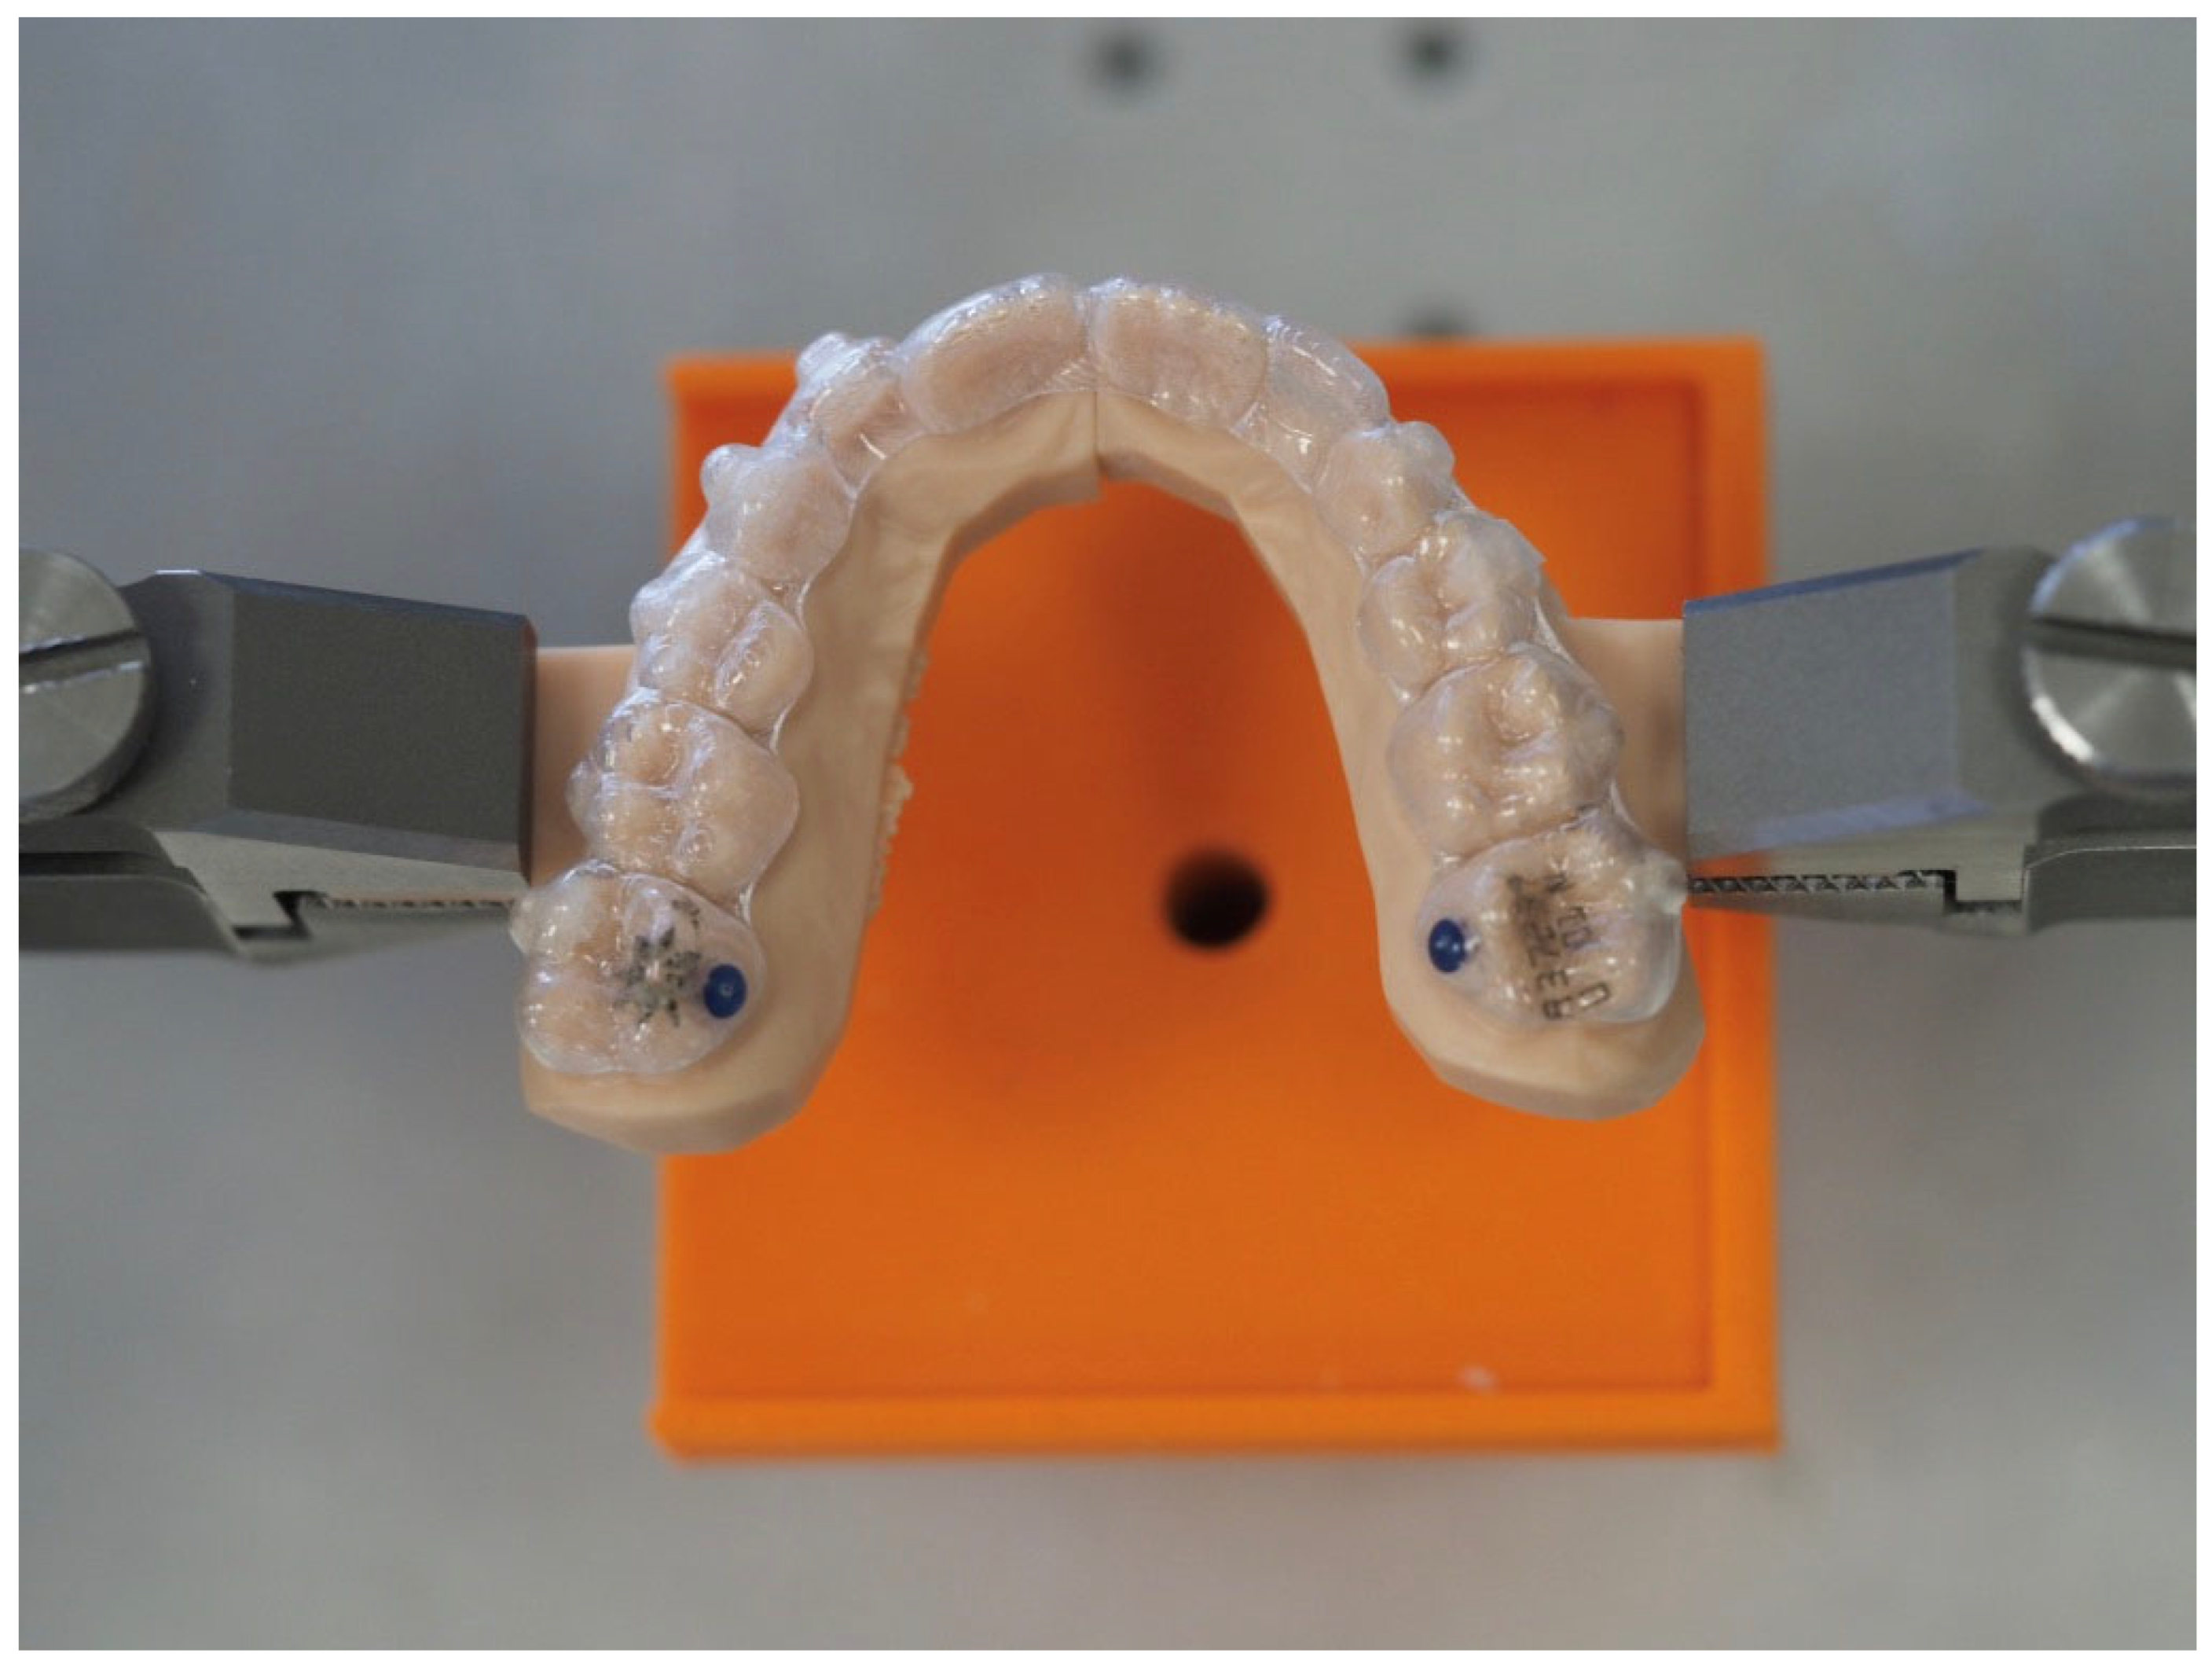 Align Technology Introduces the Invisalign® Palatal Expander System to  Address Skeletal Expansion in Growing Patients, Including Teenage Patients  Which Represent the Majority of Orthodontic Case Starts Globally